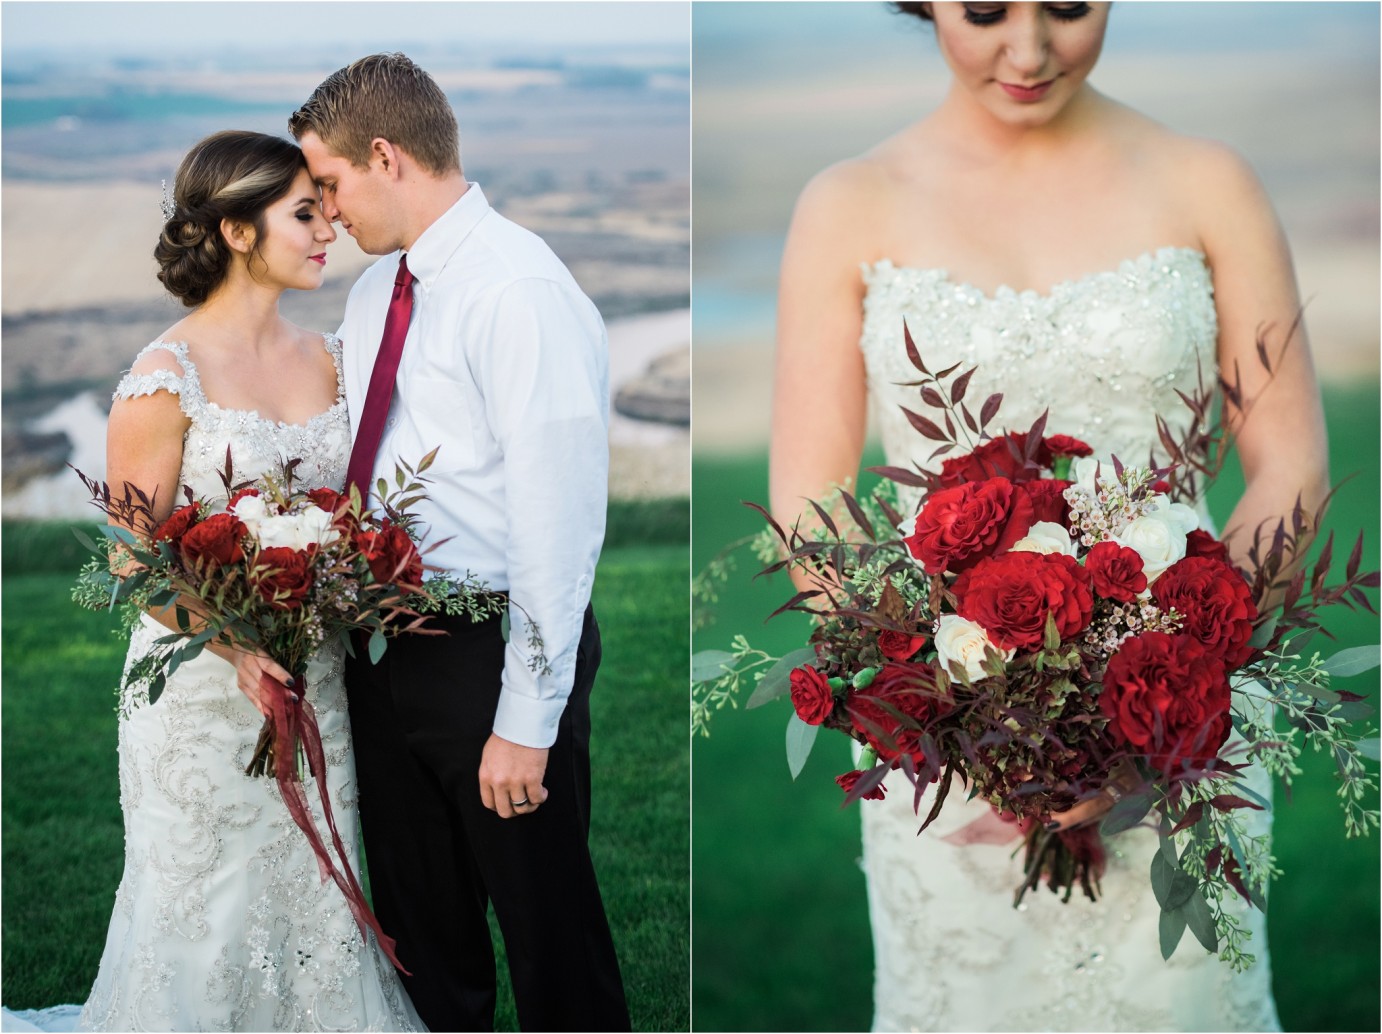 How to plan a styled shoot. Large flowing bouquet with red hearts roses